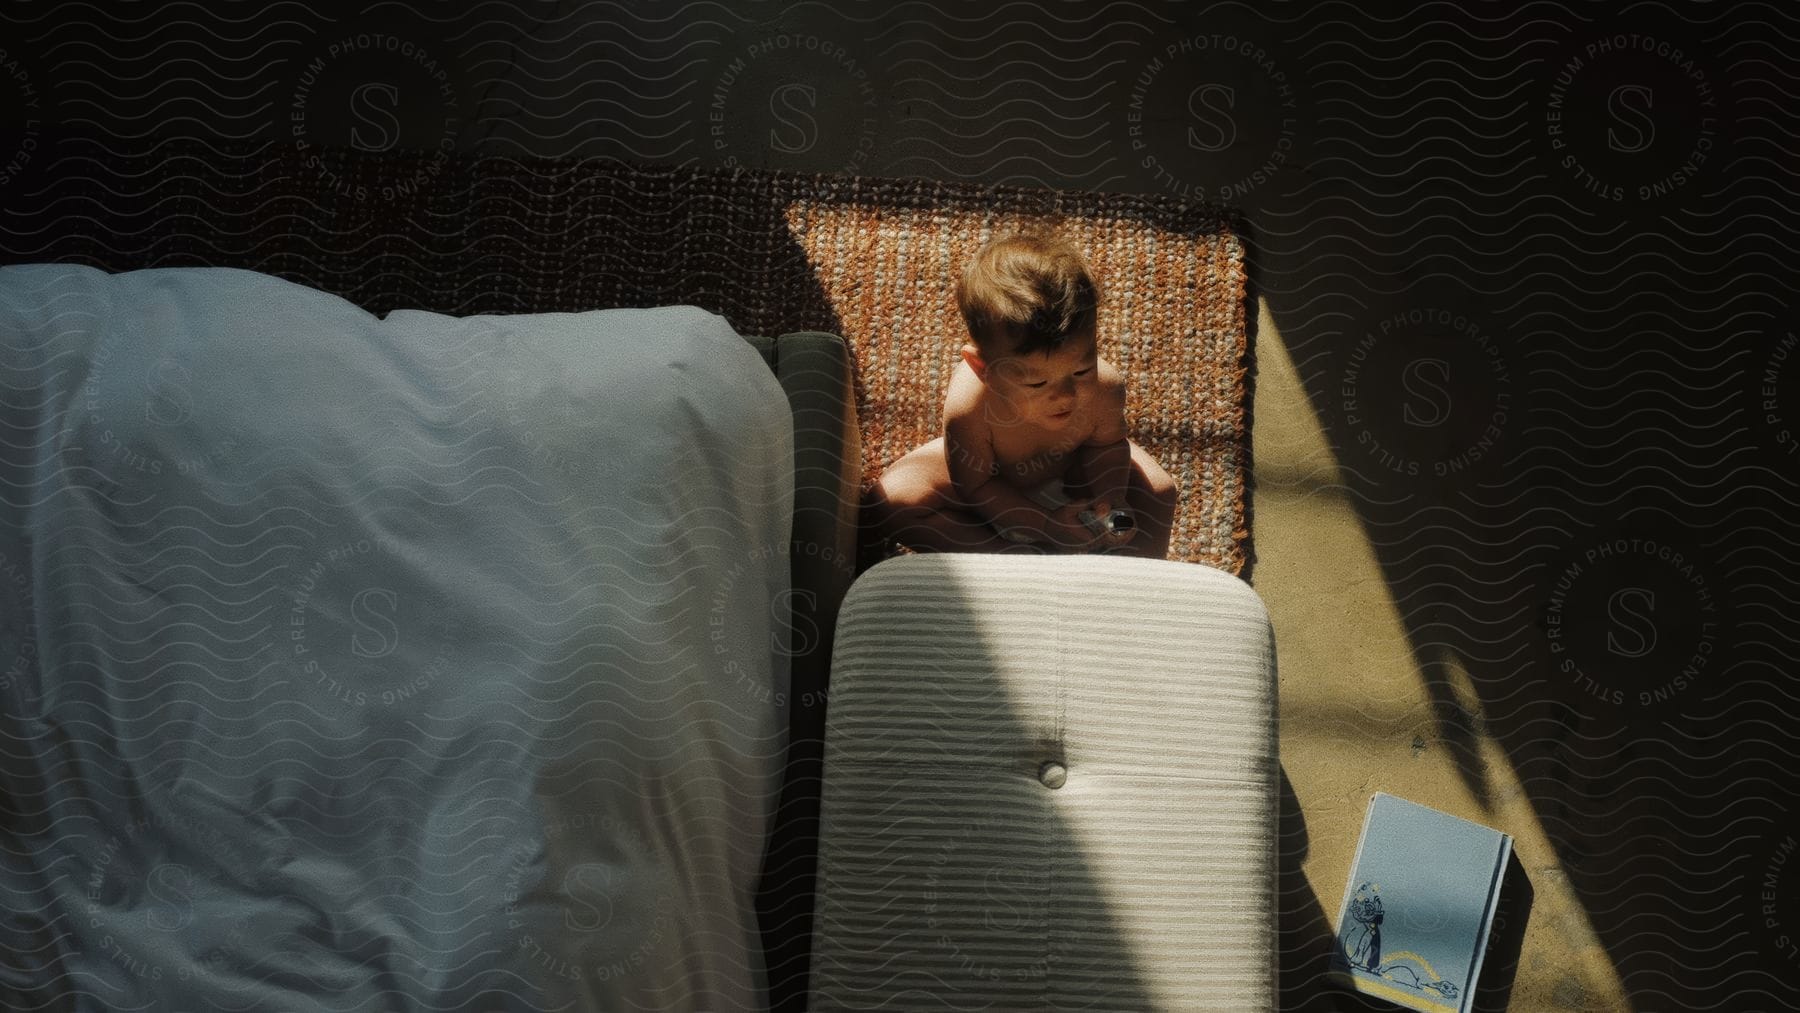 A child sitting on the floor in a bedroom